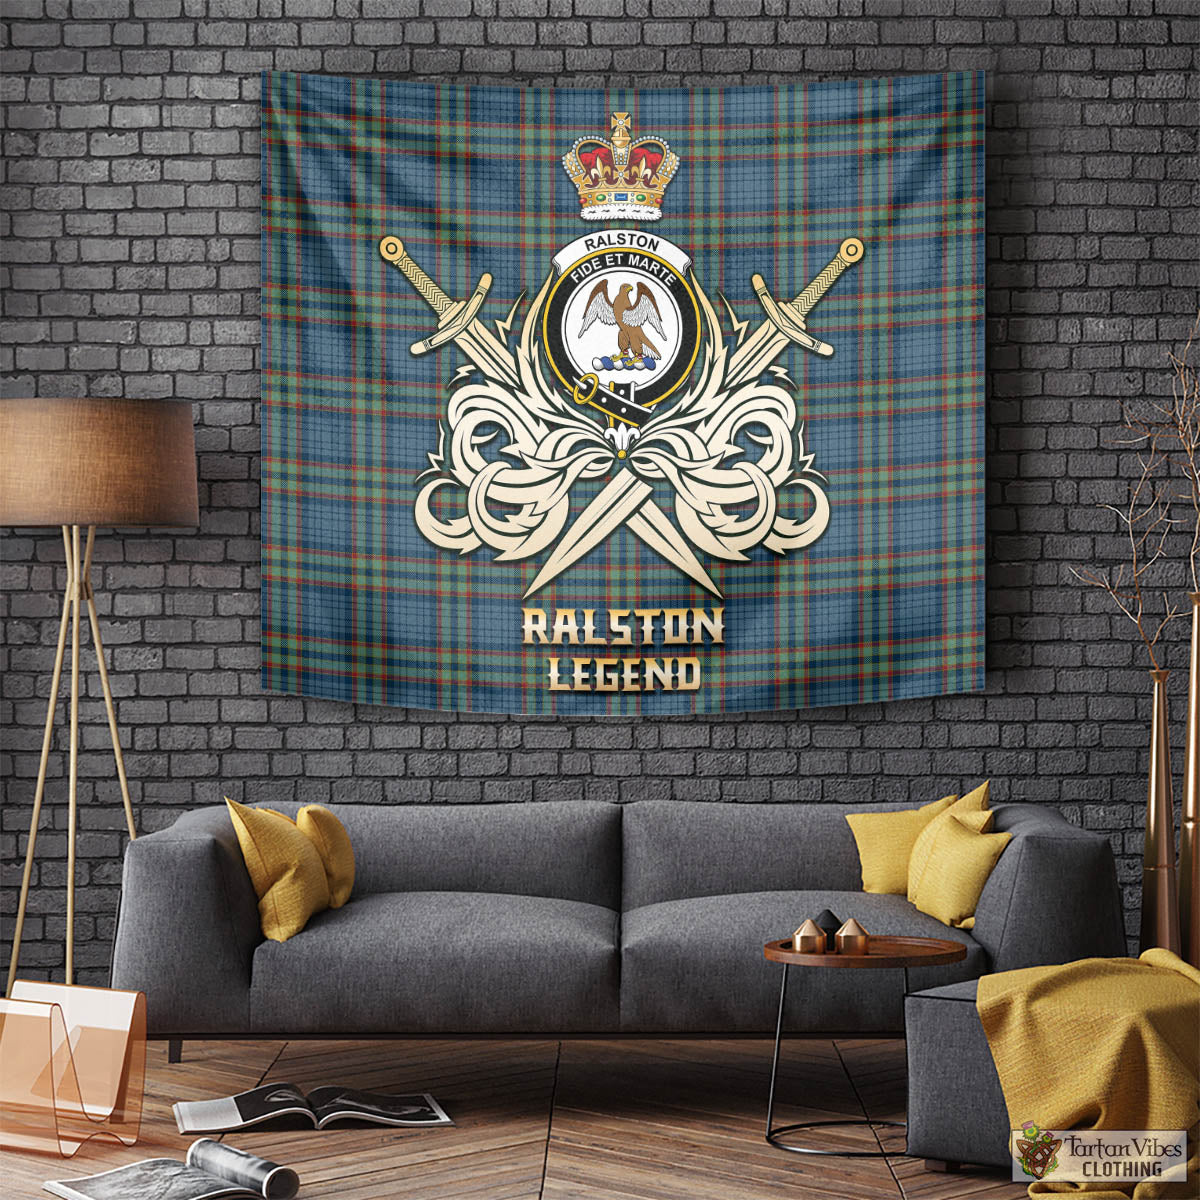 Tartan Vibes Clothing Ralston UK Tartan Tapestry with Clan Crest and the Golden Sword of Courageous Legacy